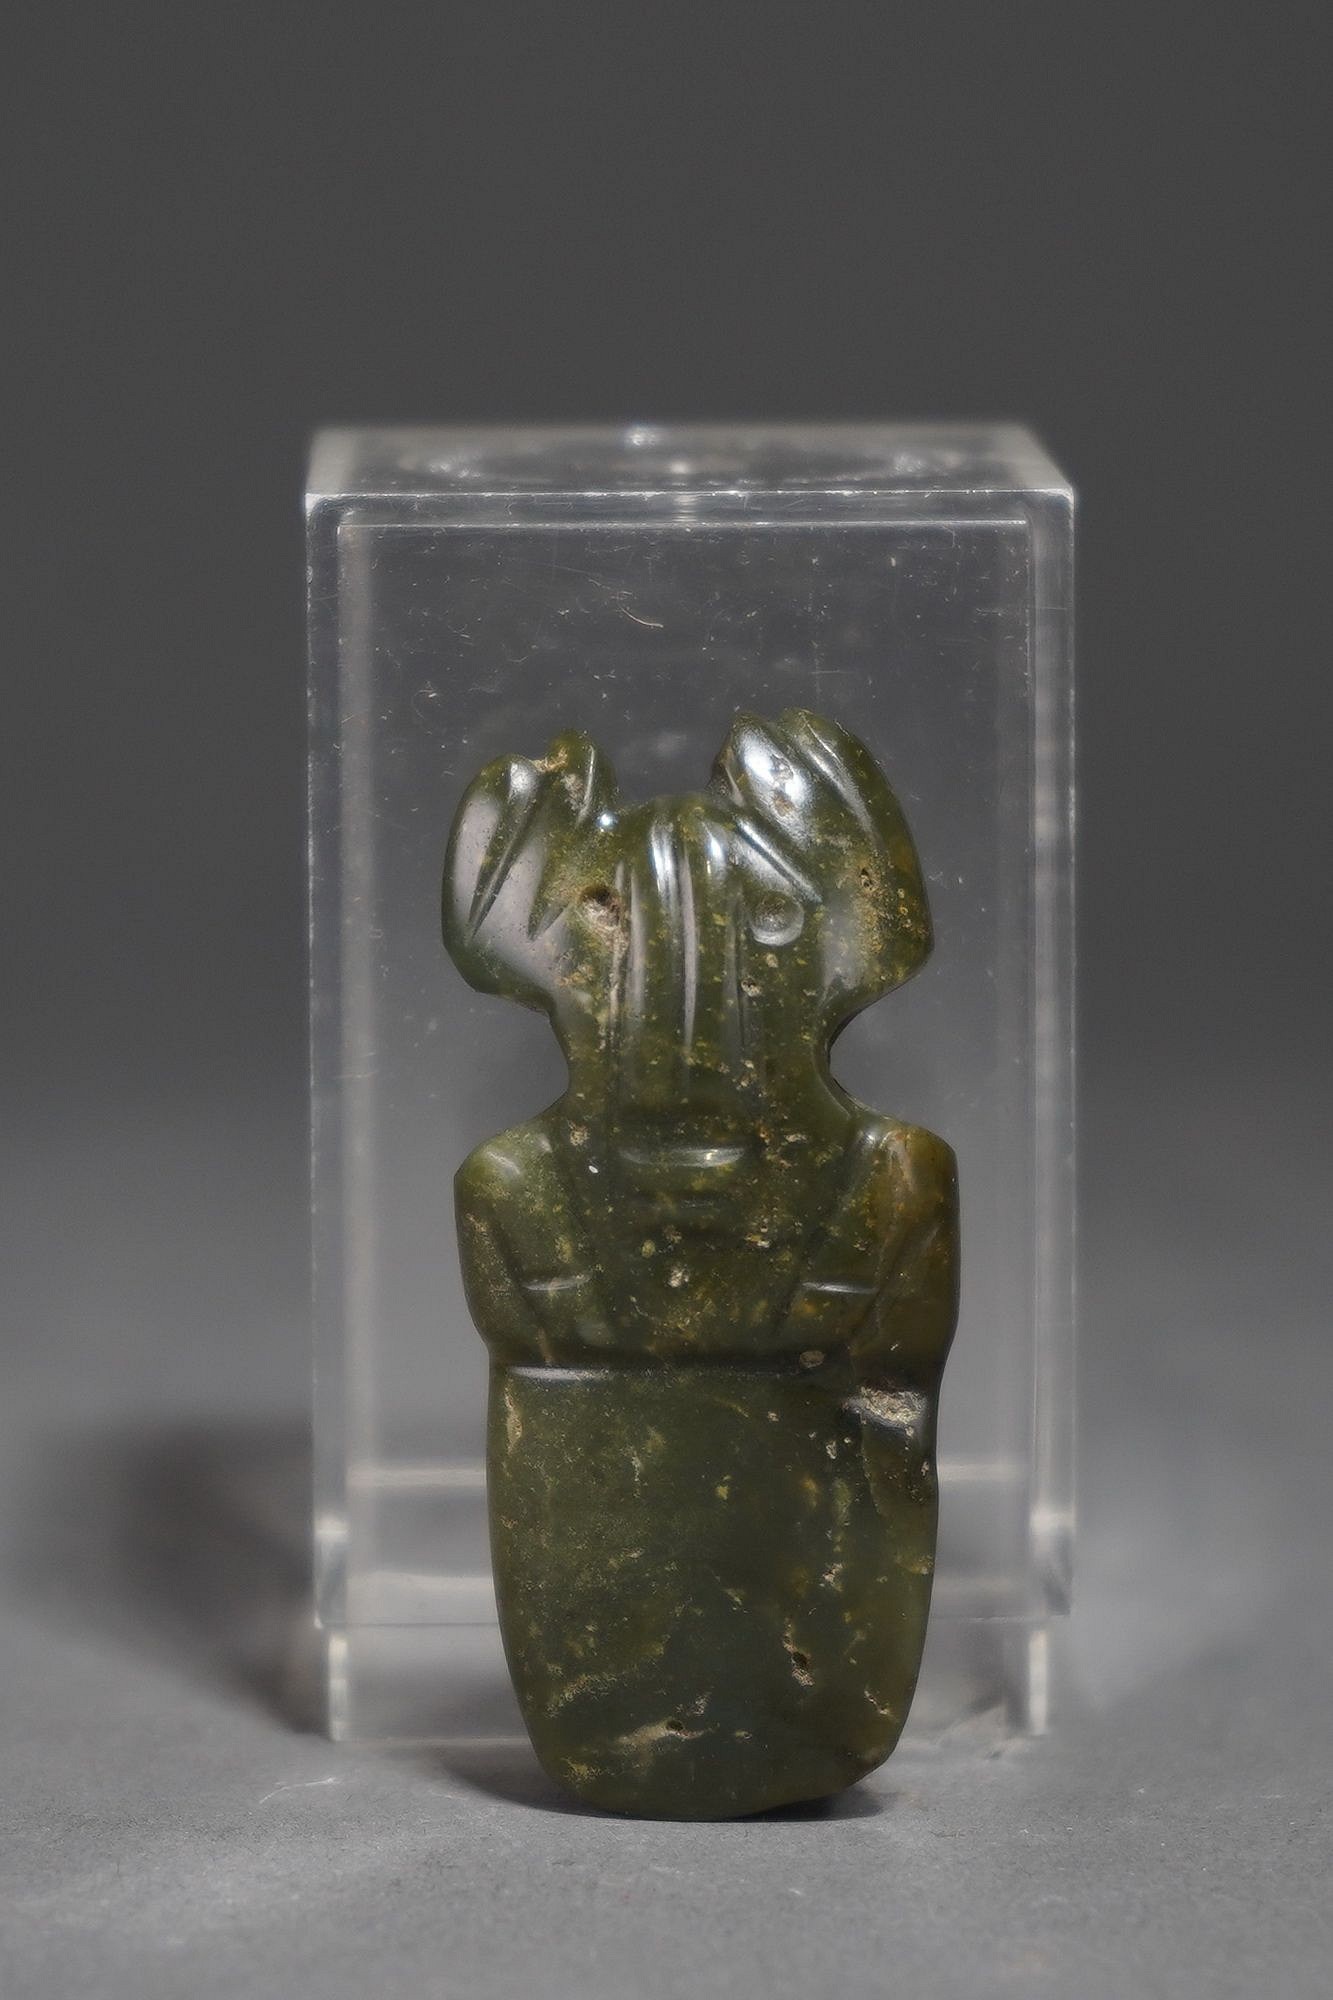 Costa Rica, Costa Rican Green Stone Figural Celt
This figurative celt is fashioned from a beautiful deep green stone and has large ears and hands held to its chest.   It would have been worn as an adornment as well as used as a shamanic amulet to ward of illness or bad spirits.
Media: Stone
Dimensions: Height 2.1/2"
$550
95050a